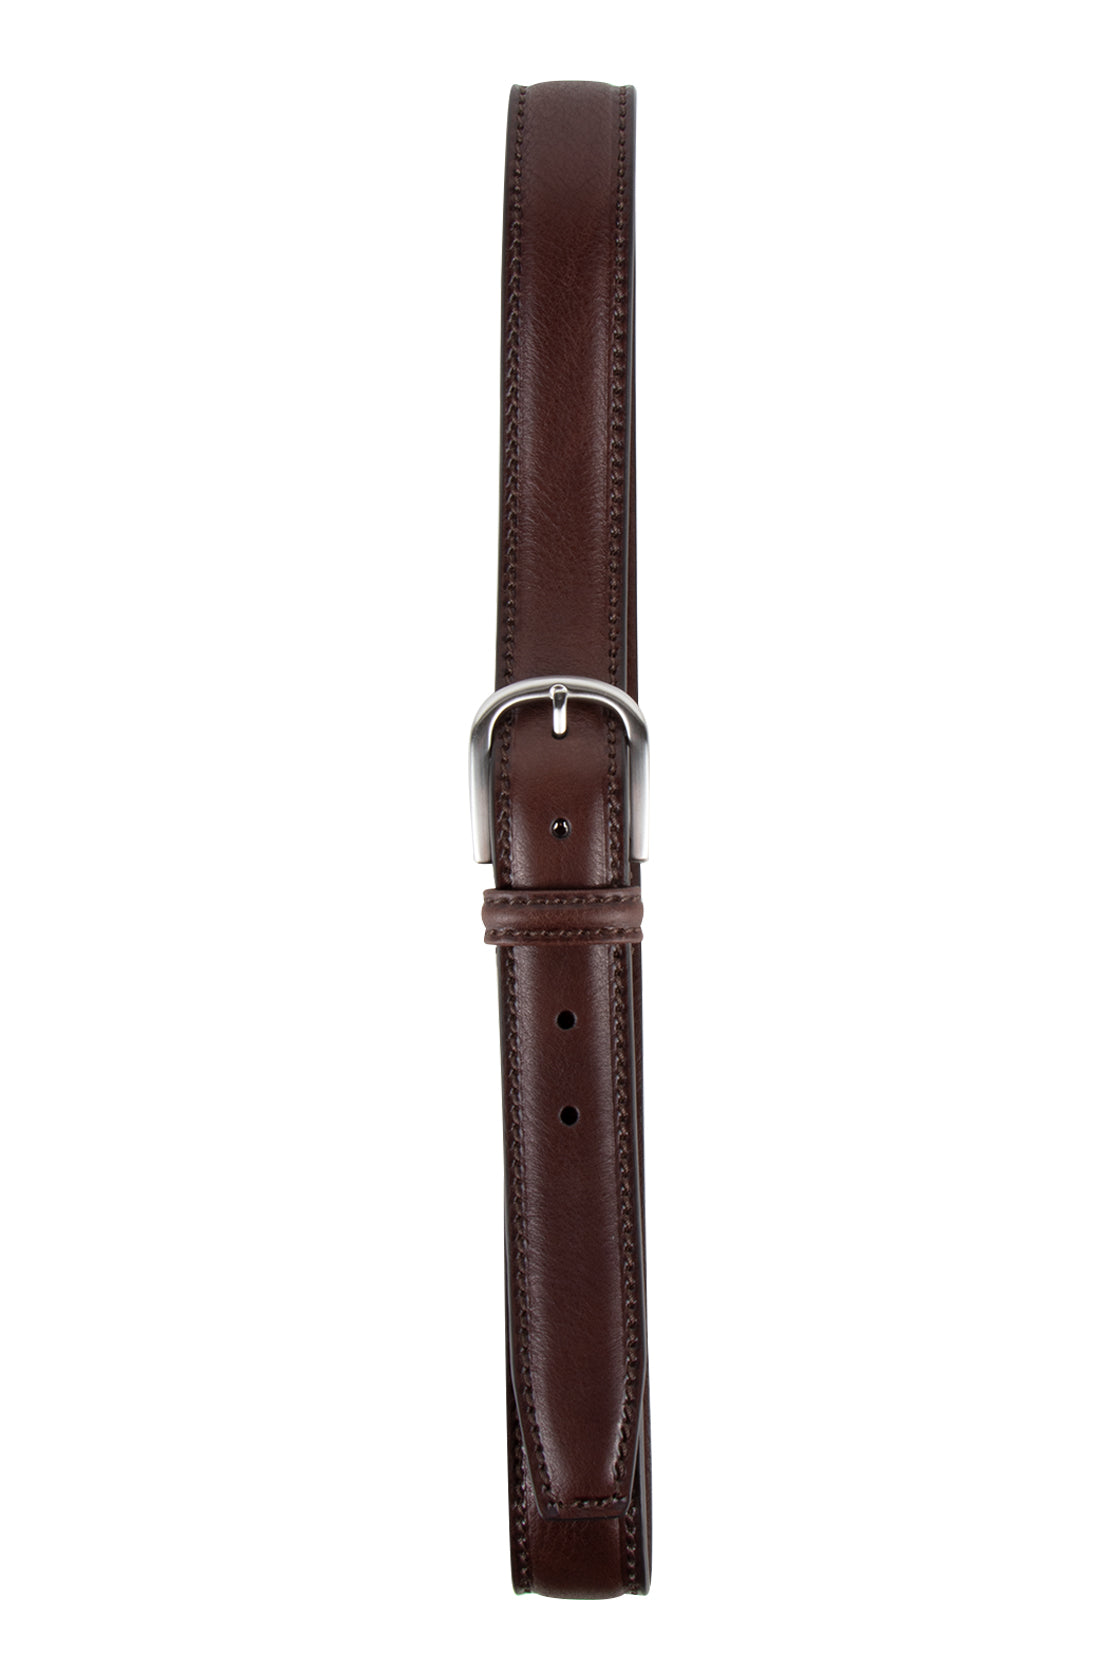 Anderson's Leather Semi Formal Belt Brown